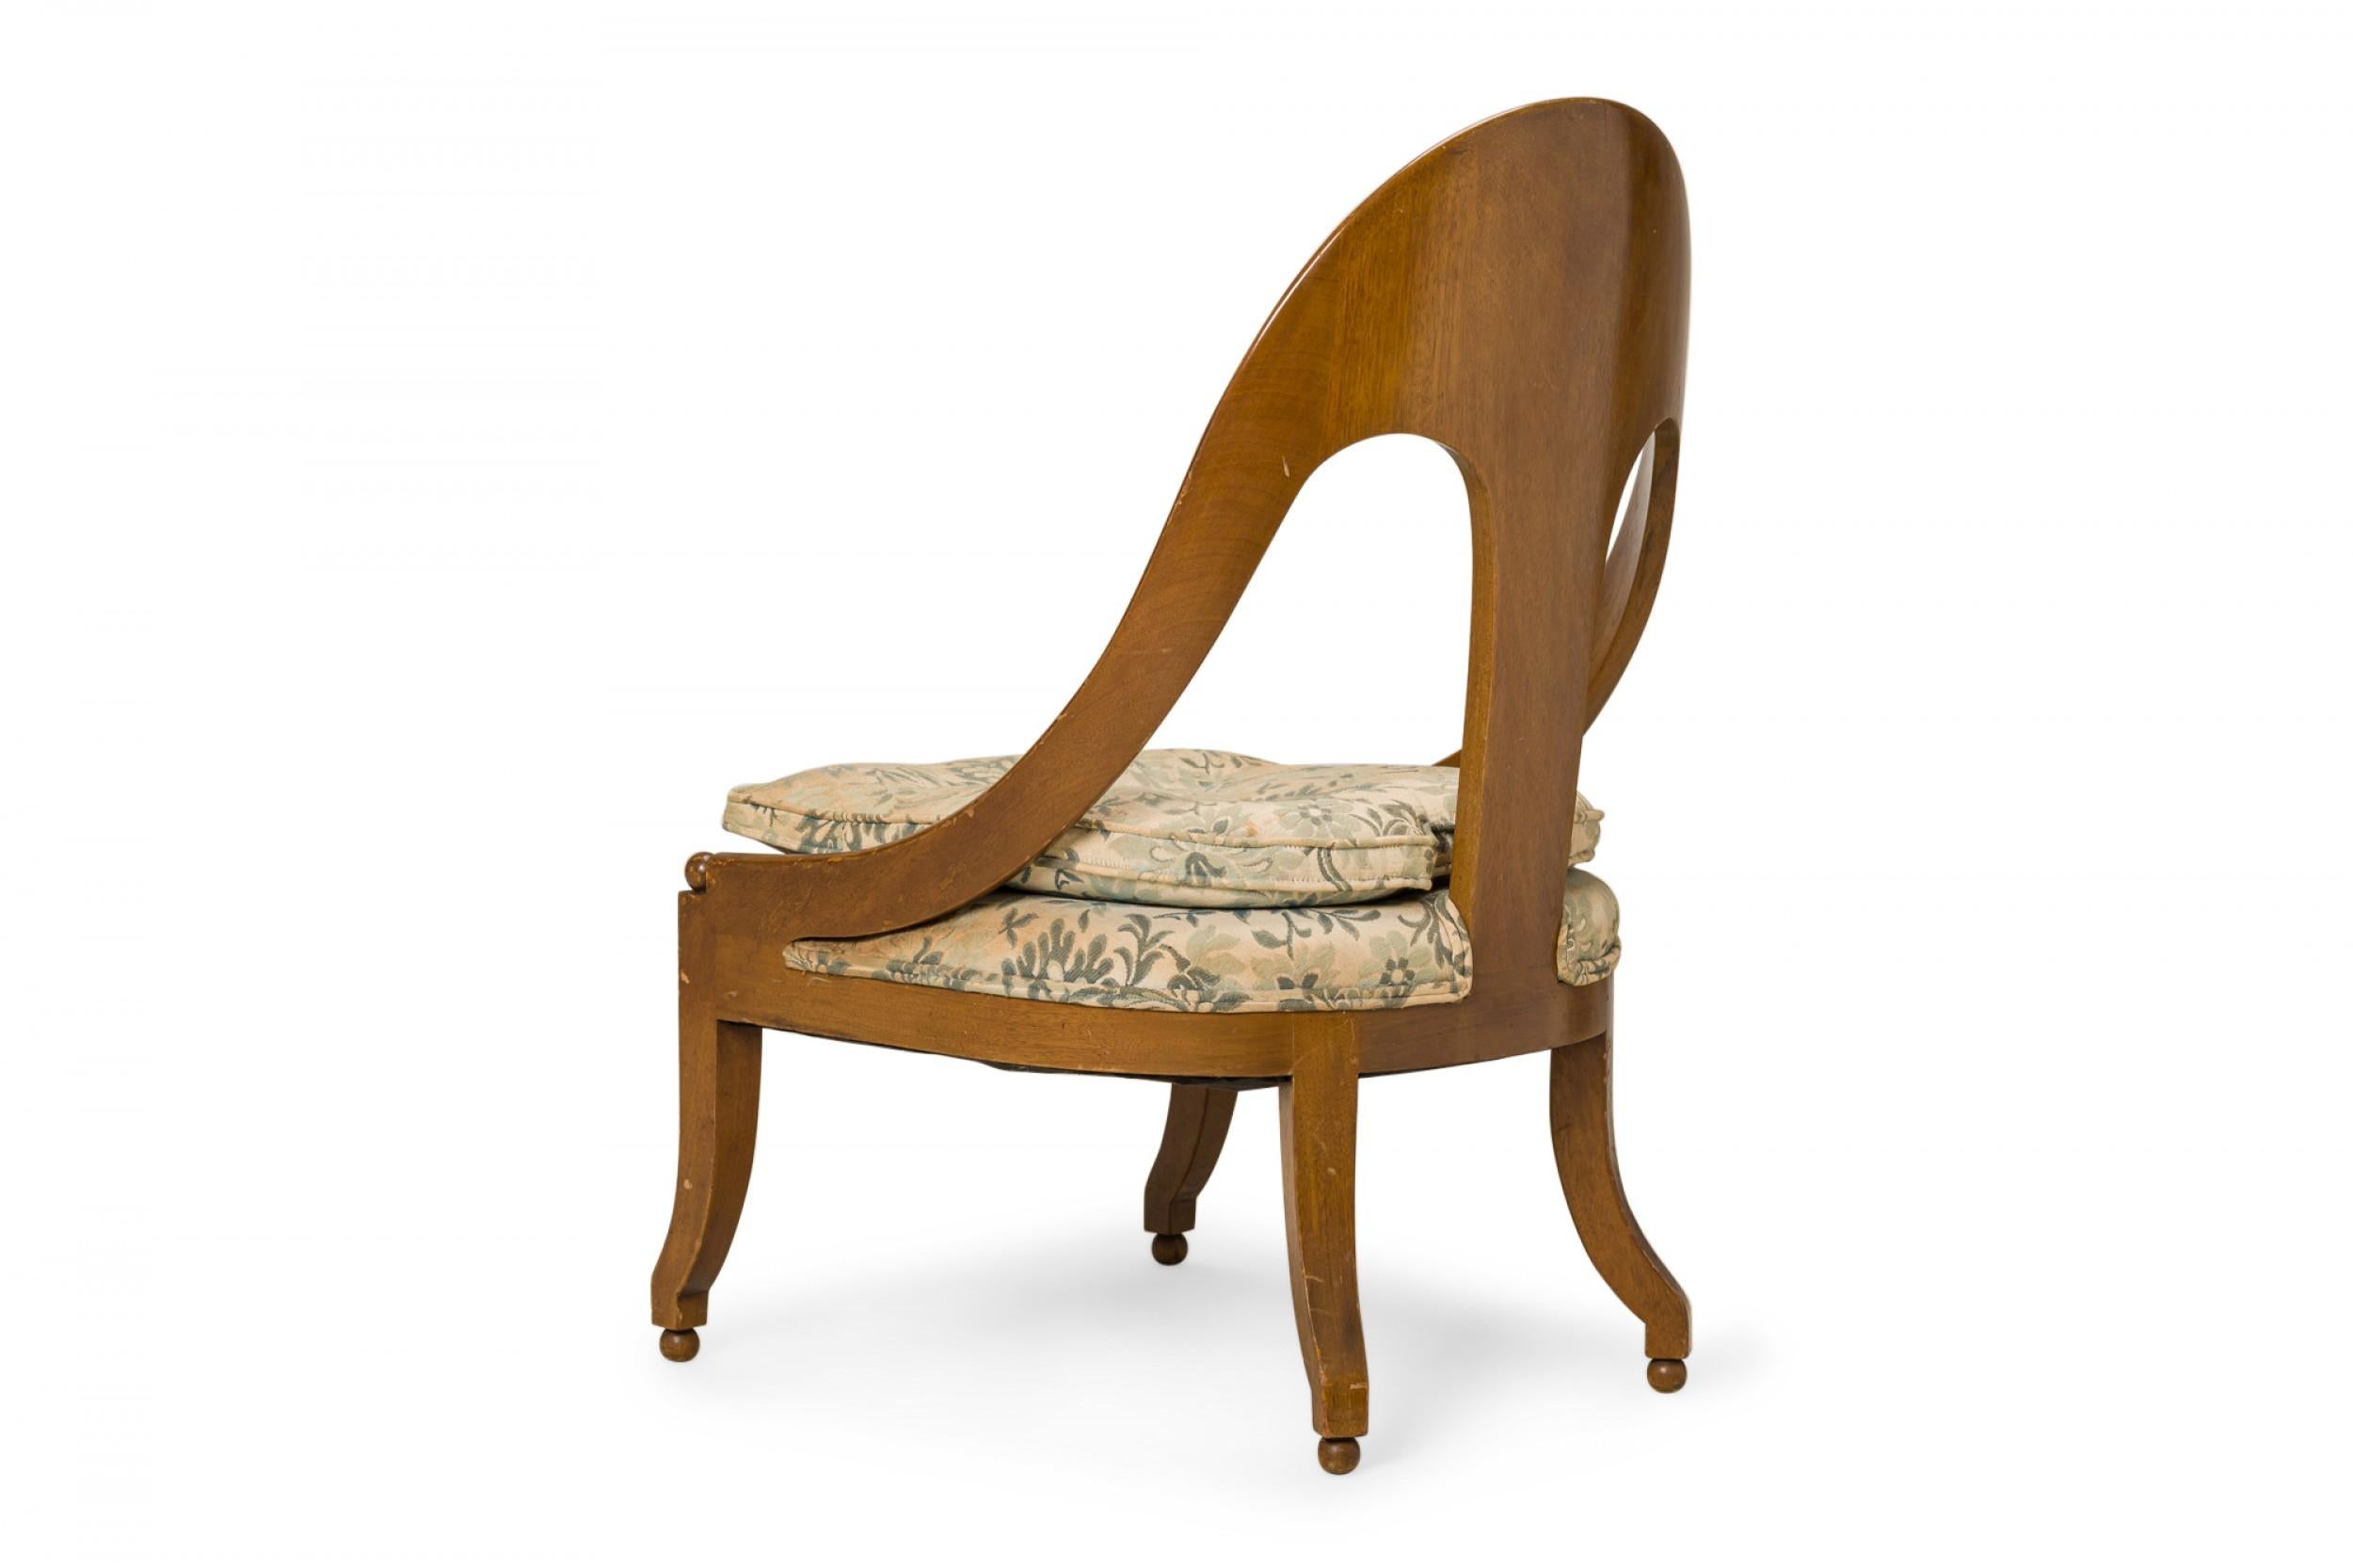 American Walnut and Floral Fabric Upholstery Spoon Back Side Chair For Sale